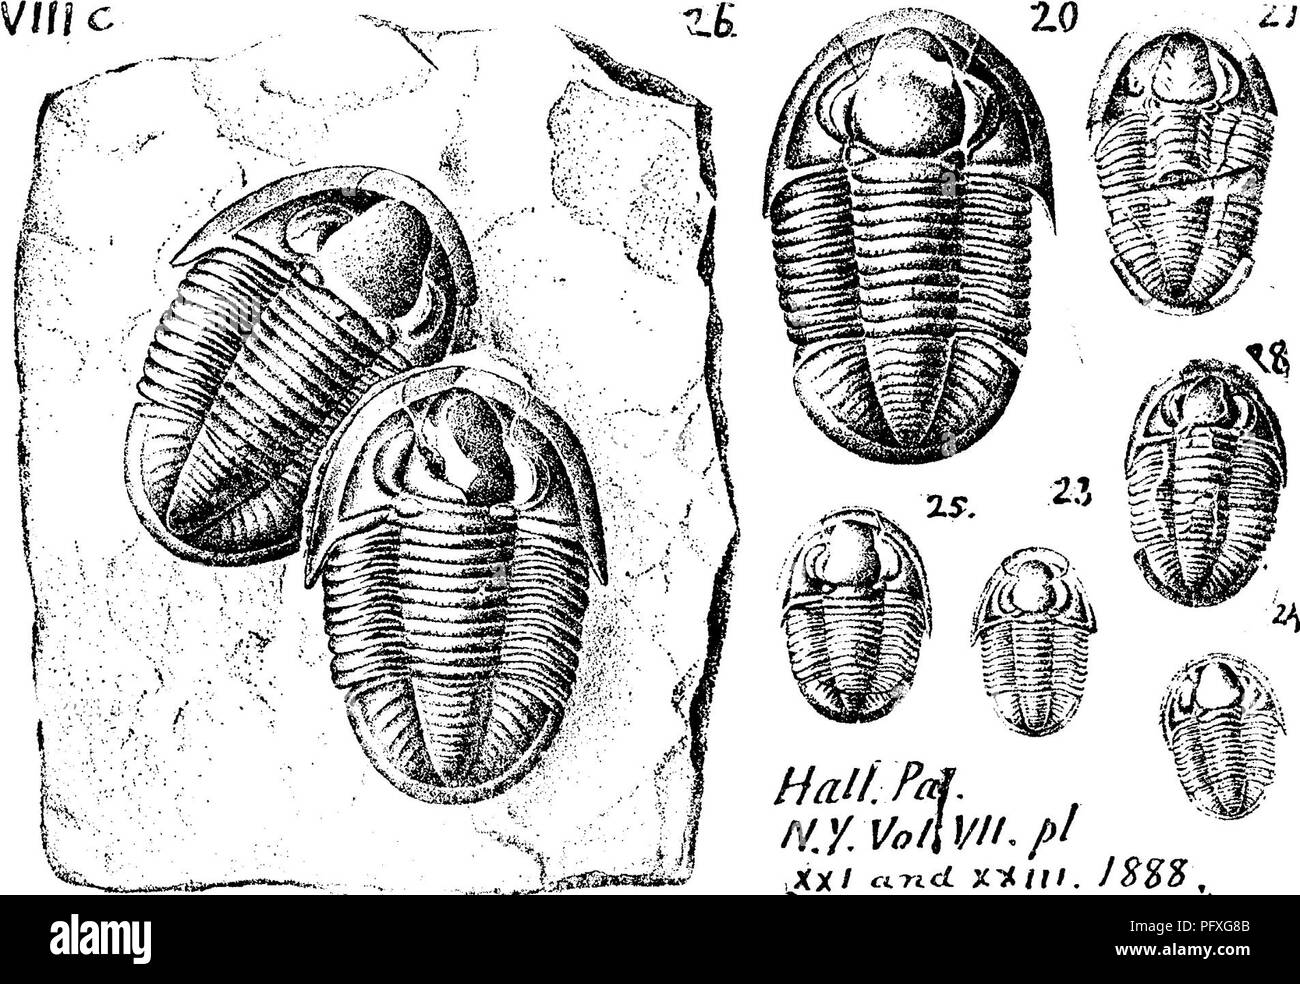 . A dictionary of the fossils of Pennsylvania and neighboring states named in the reports and catalogues of the survey ... Paleontology. 771 Proe. has a narrower middle lobe, -| instead of } Ihe whole length of the animal, and few segments in the side lobes, with a flattened instead of thickened border; surface as far as seen smooth, and coincides with all the markings of the cast, showing that the skin of the trilobite was like thin horn. VIII a. Proetus protuberans, Hall, Pal. 3. VI Proetus prouti, Shumard, 1863. VIII c. Proetus rowi. ( Calymene rowvL Green, Am. J. S. XXXIII,. NyvoilviLpi 18 Stock Photo